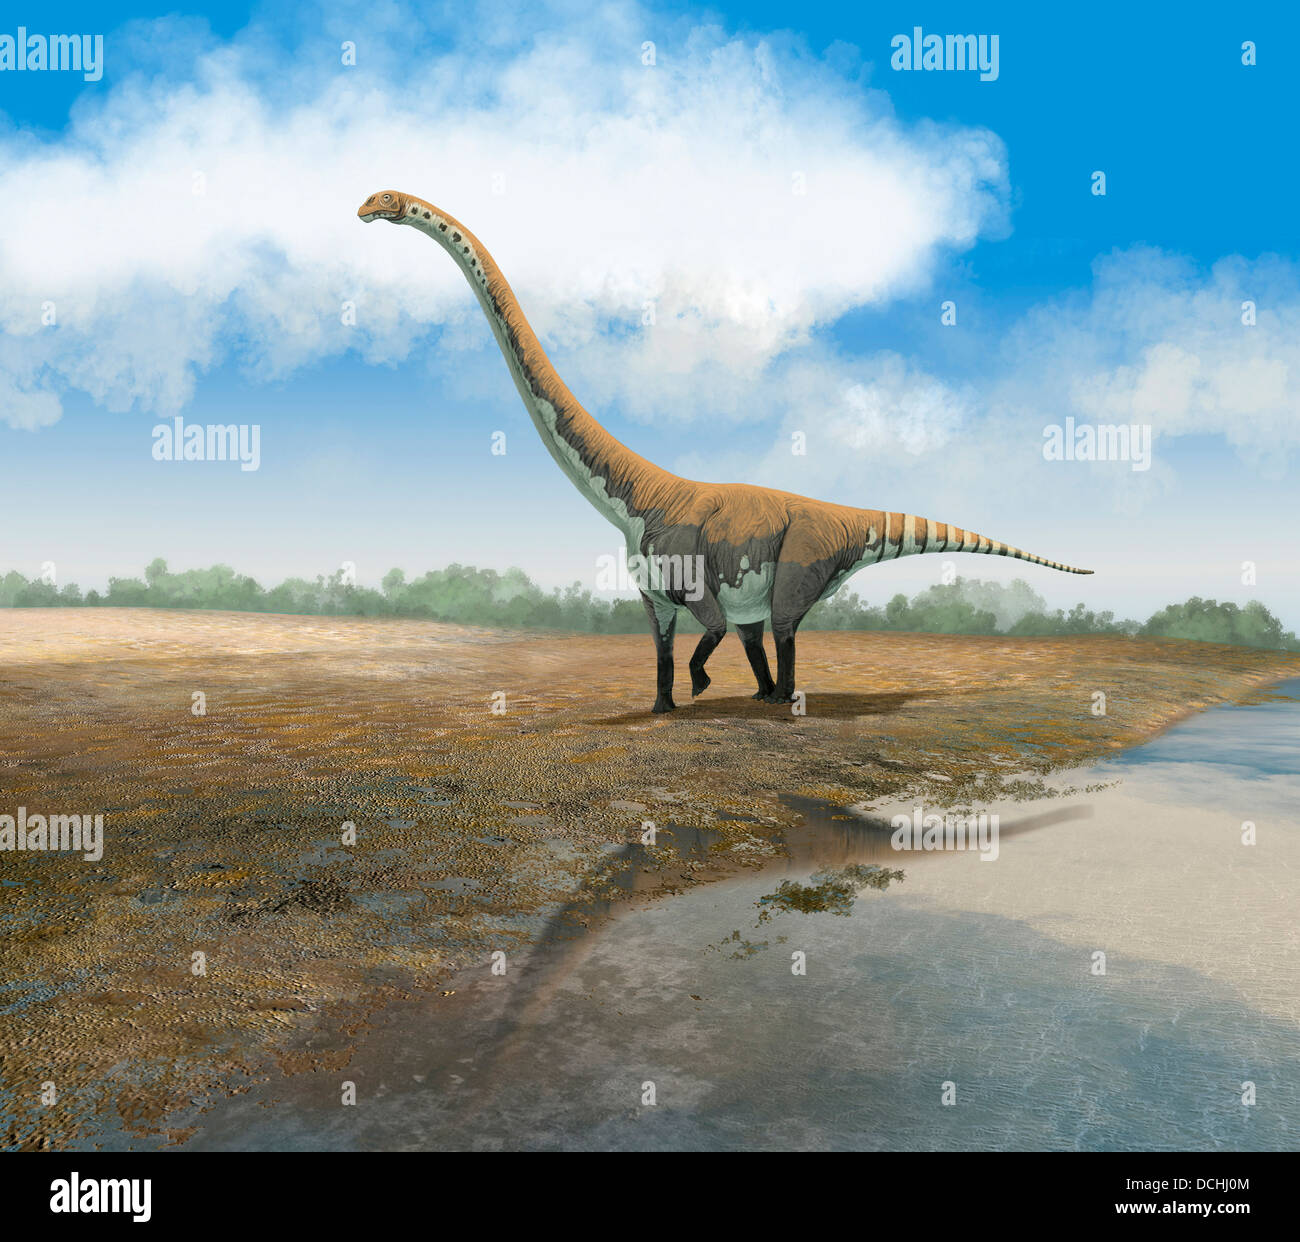 The Euhelopus sauropod, Omeisaurus tianfuensis, from the Middle Jurassic of Asia. Stock Photo